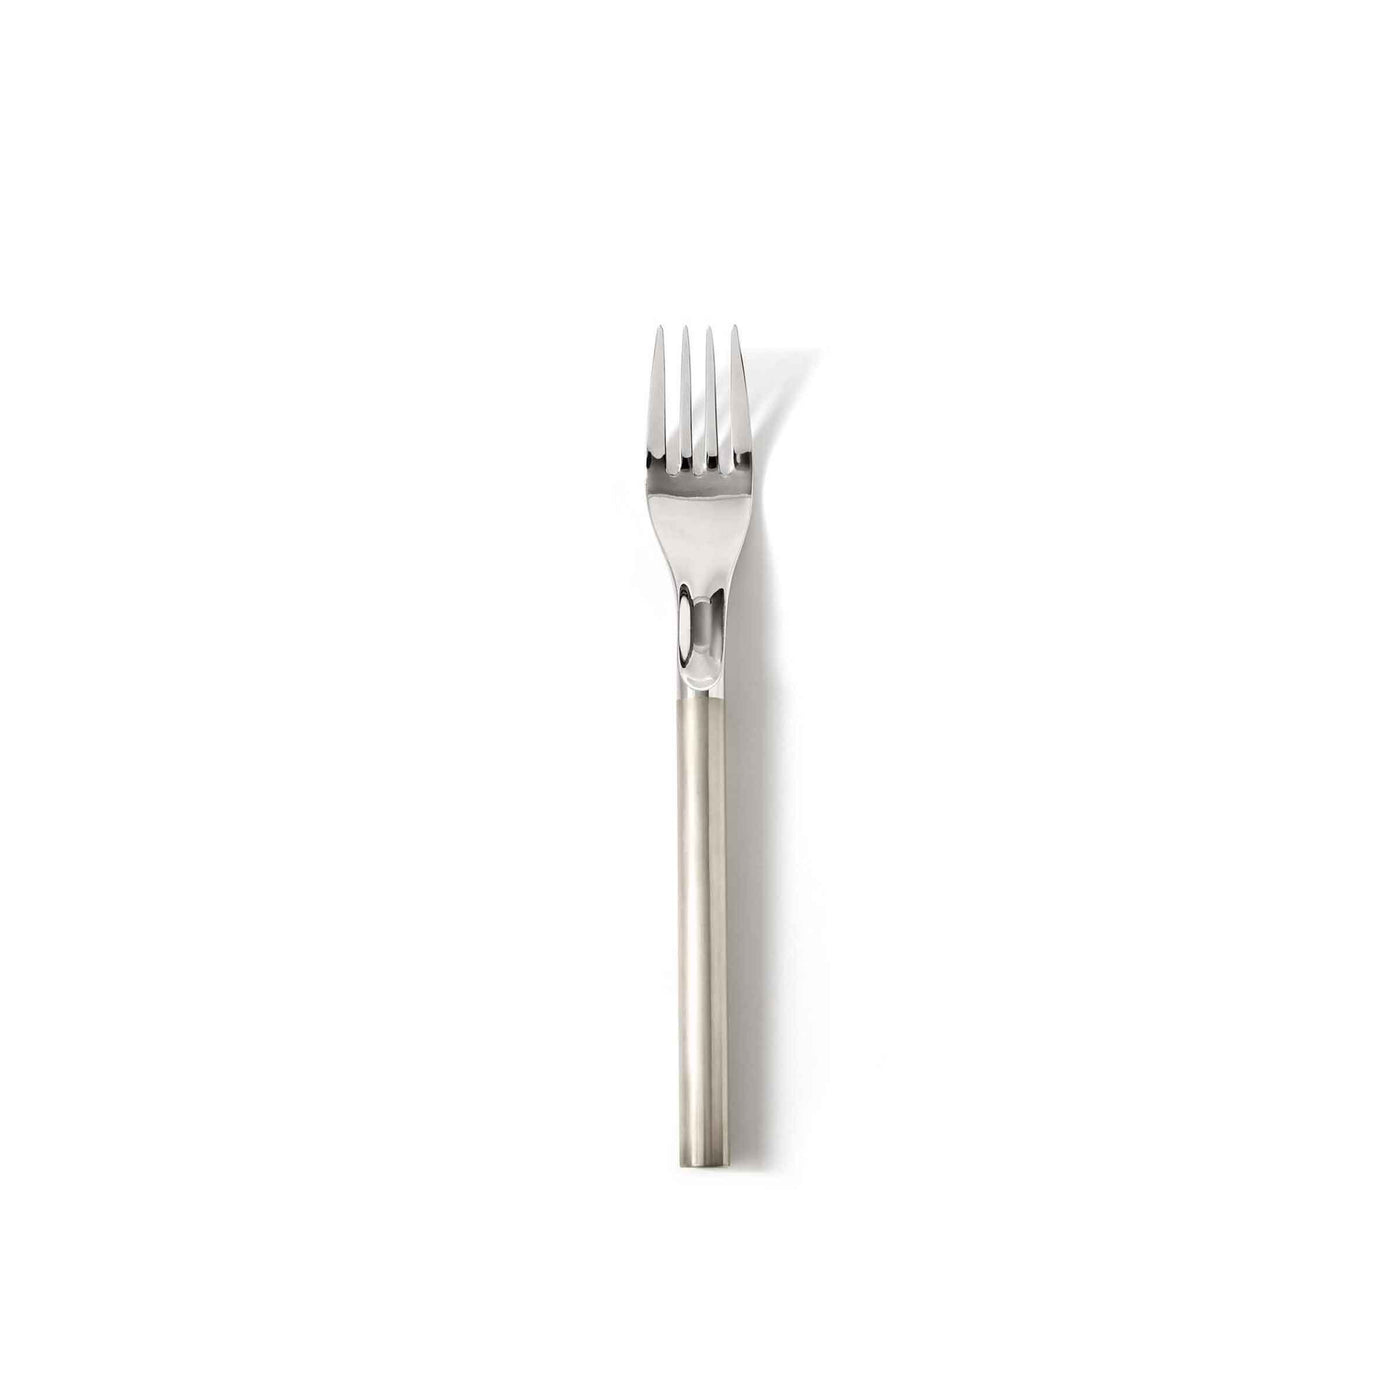 Stainless Steel Cutlery LE DUE FACCE DELLA LUNA Set of 24, designed by Afra & Tobia Scarpa for Cassina 05